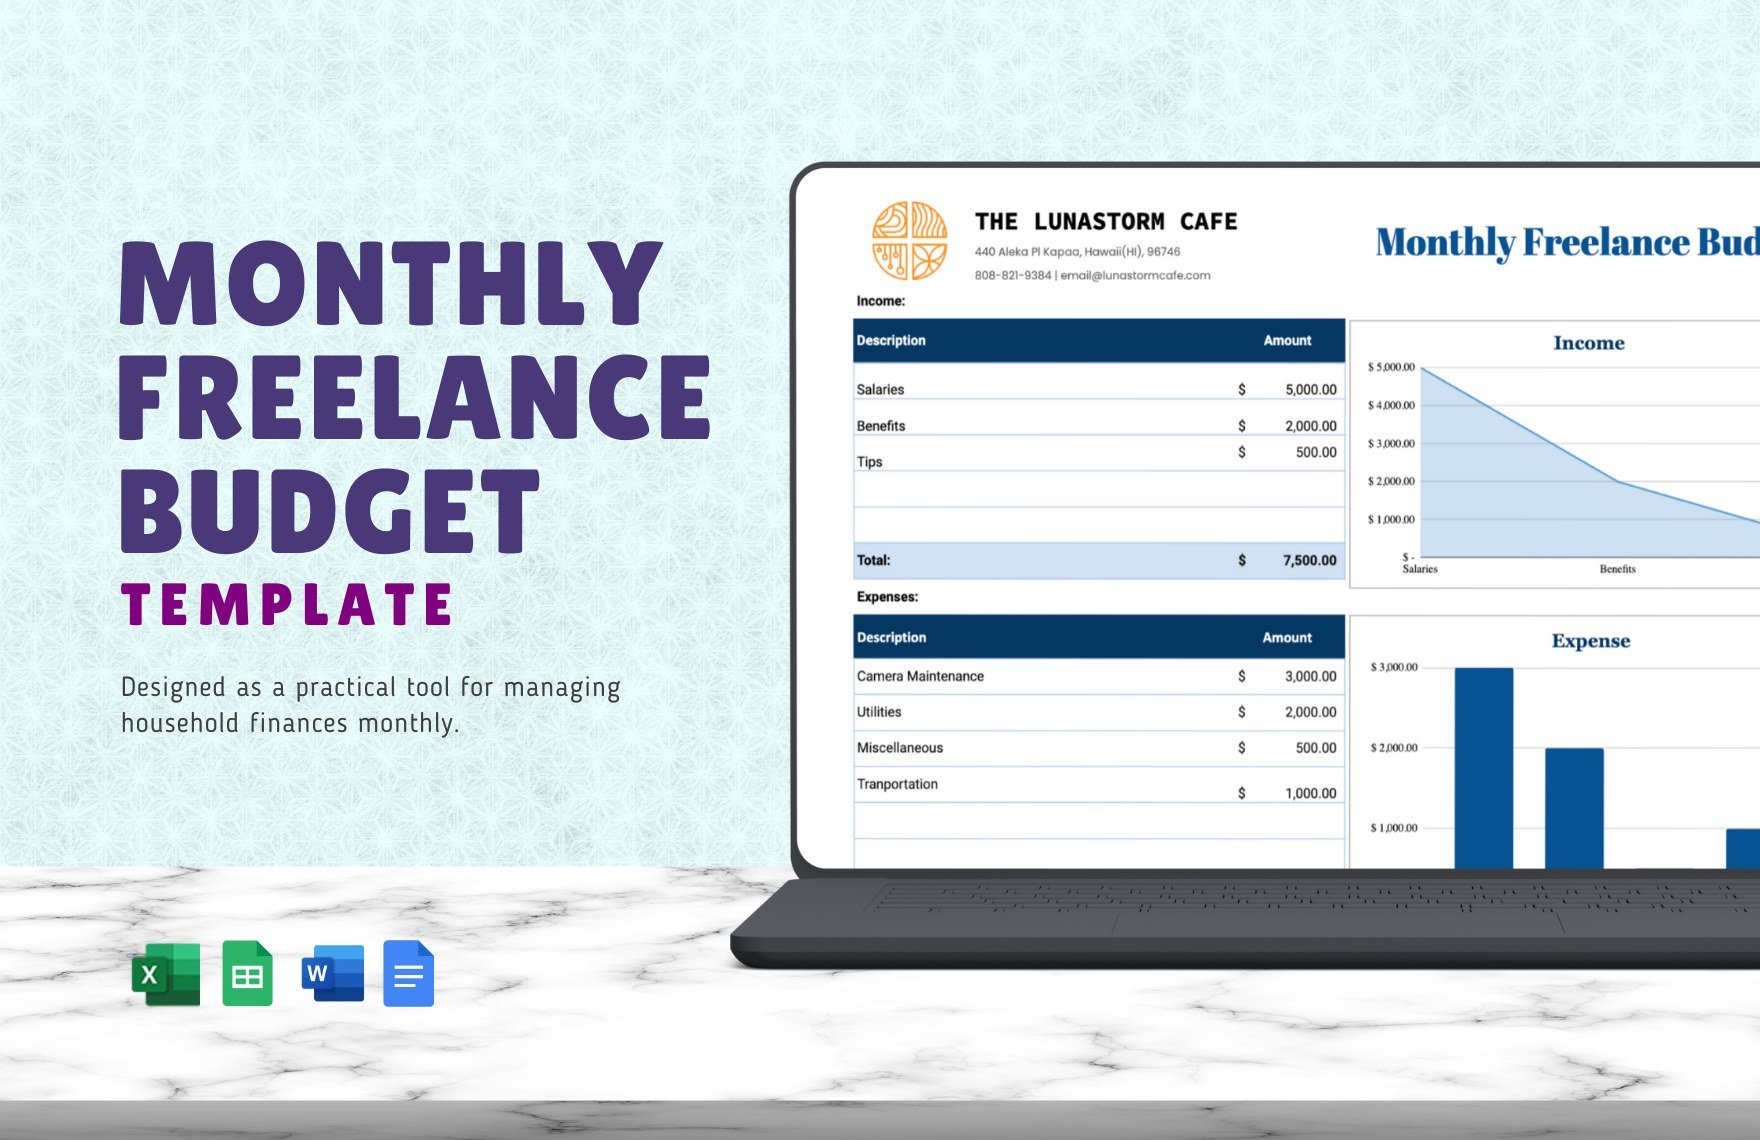 Monthly Freelance Budget Template in Word, Google Docs, Excel, Google Sheets